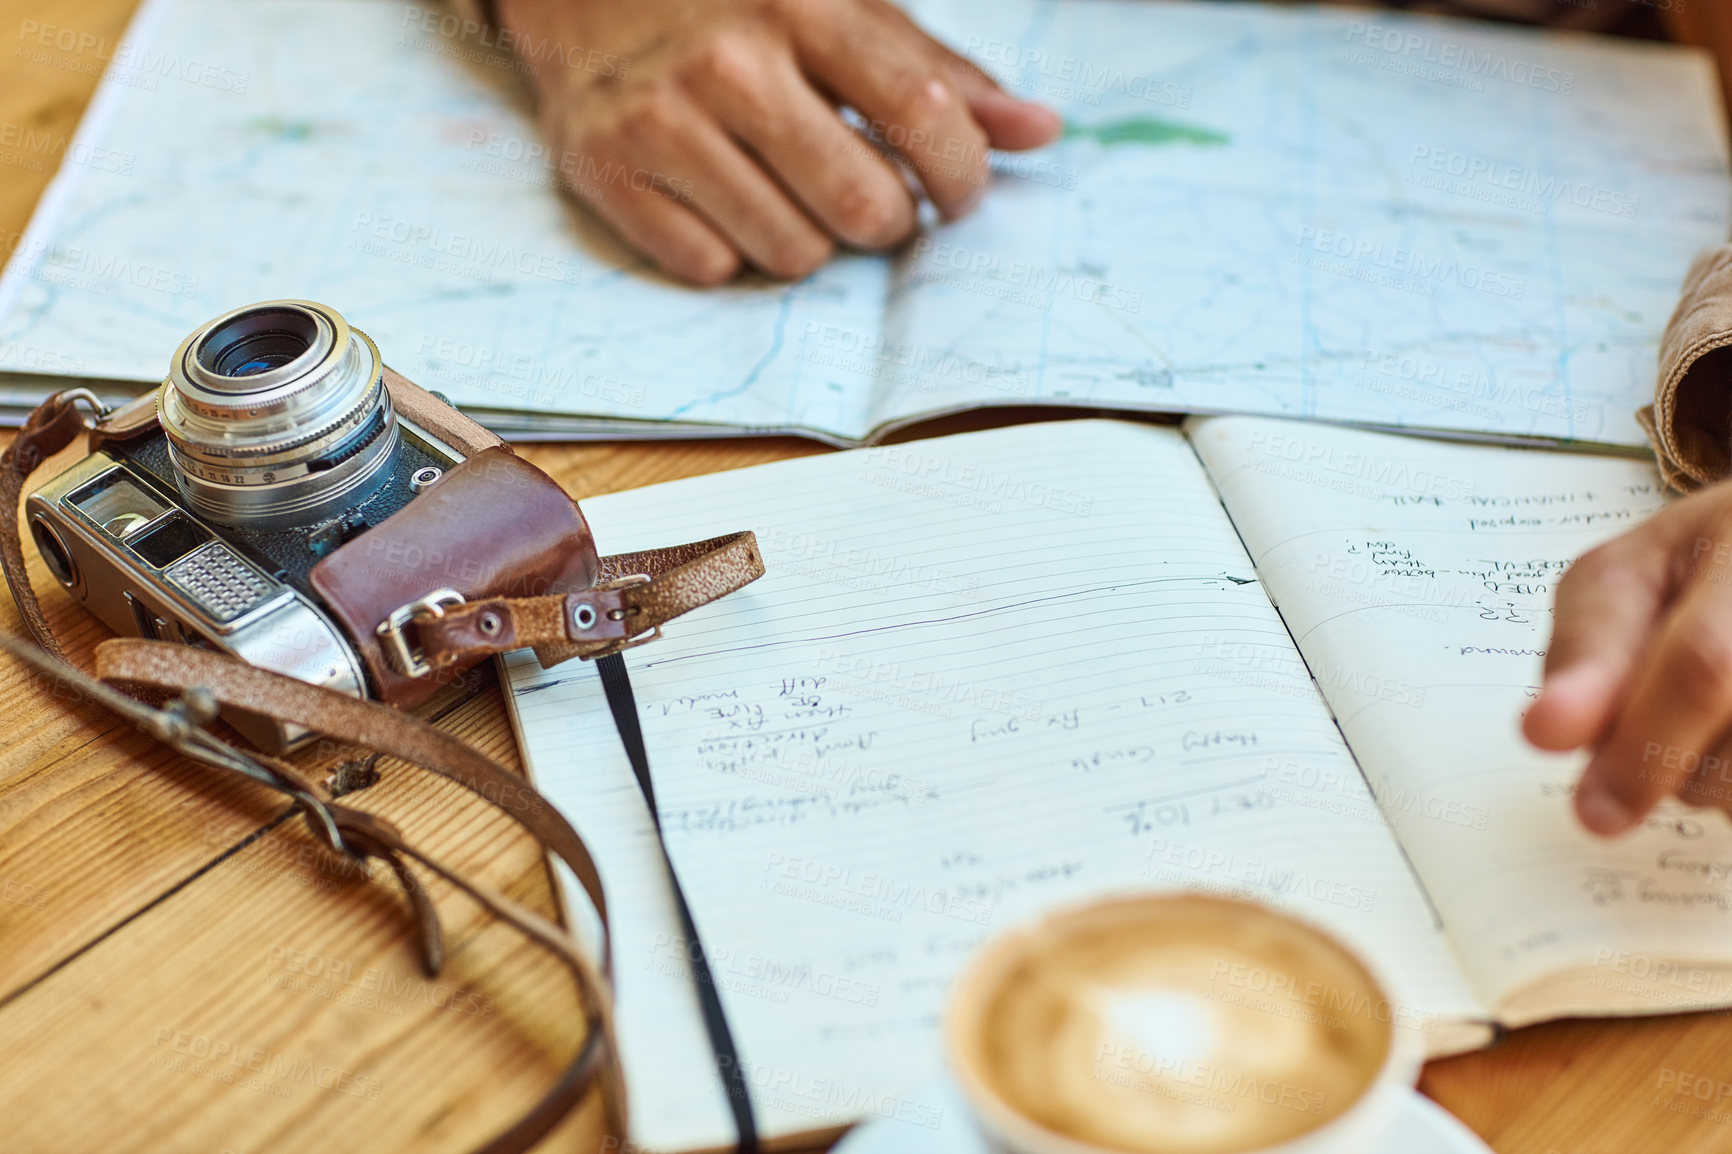 Buy stock photo Shot of an unidentifiable tourist looking at maps and travel journals while enjoying coffee at a cafe